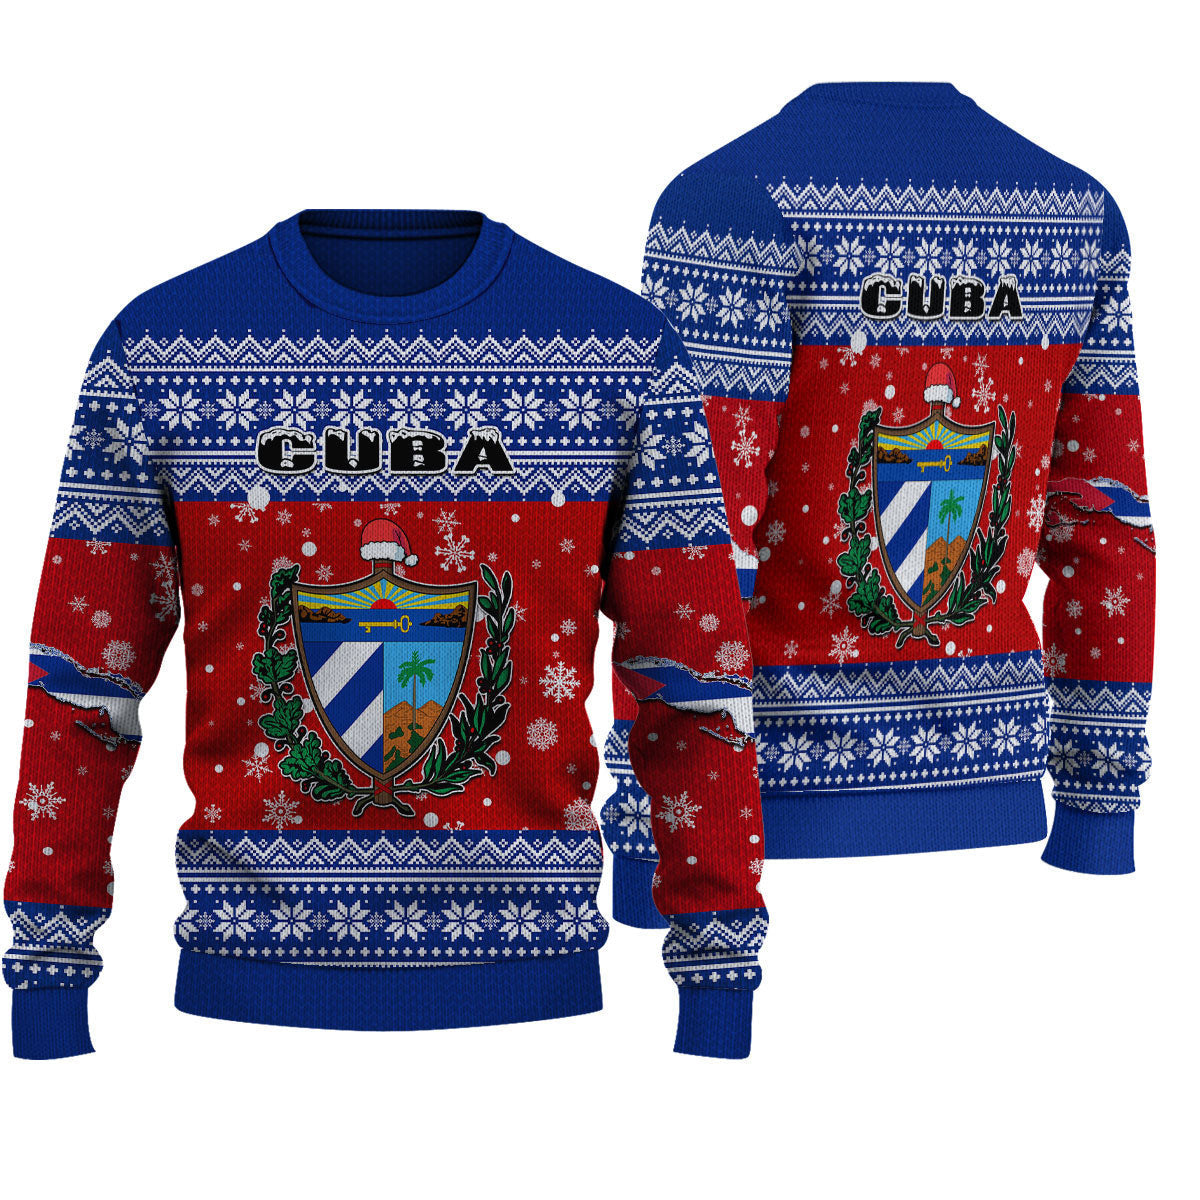 wonder-print-shop-ugly-sweater-cuba-christmas-knitted-sweater